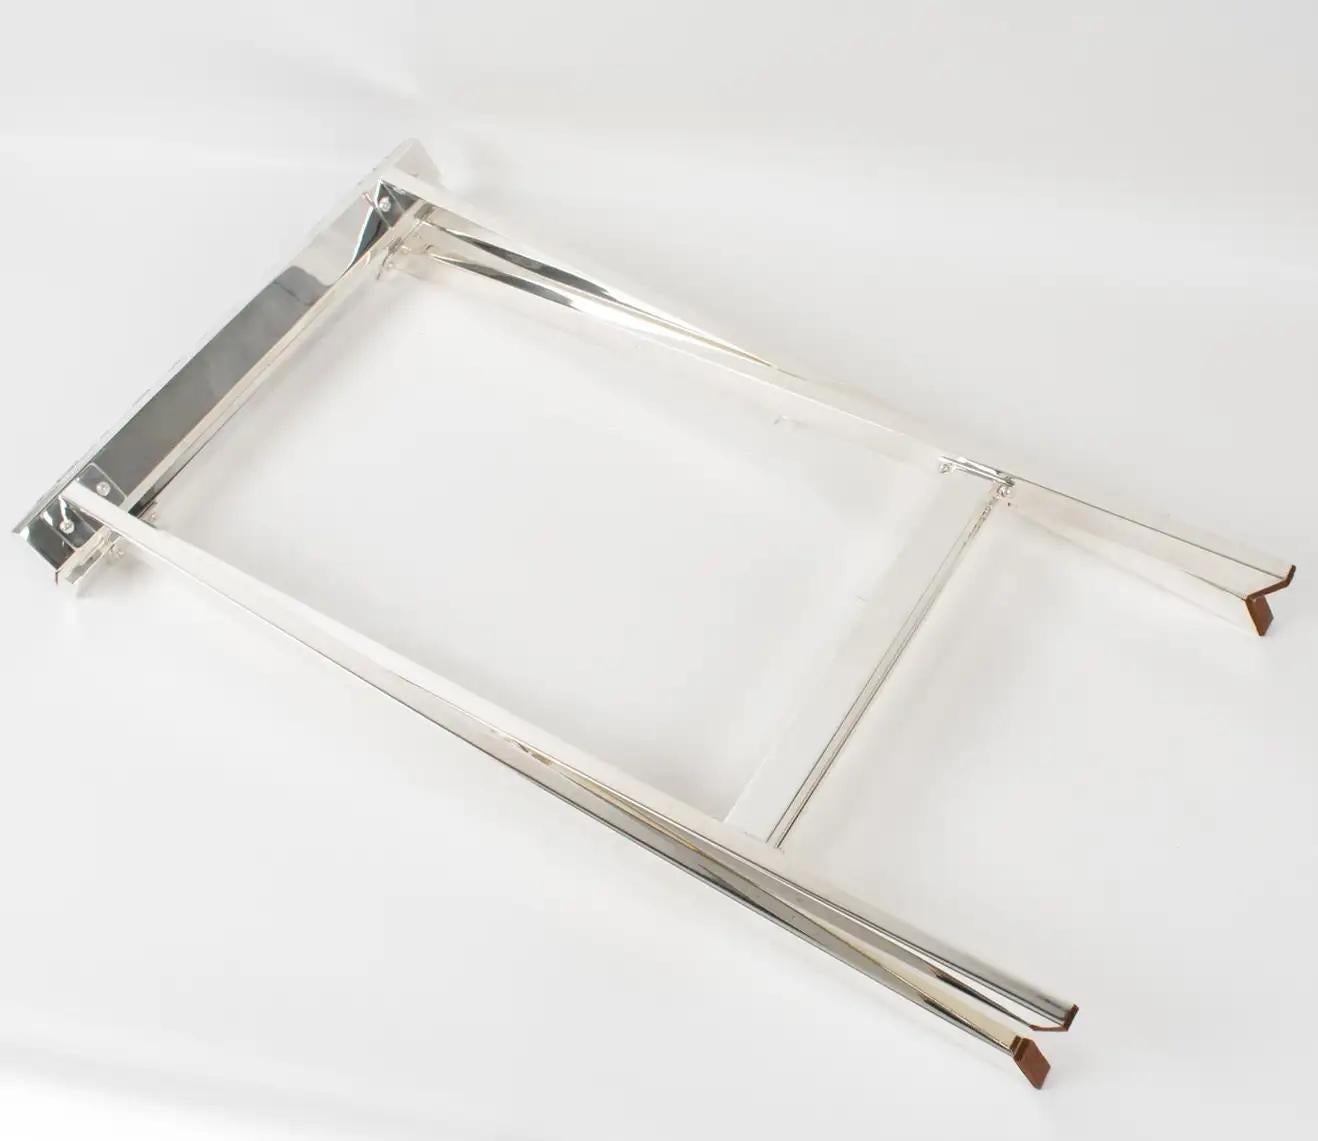 Christian Dior Folding Tray Table Tortoiseshell Lucite and Silver Plate, 1960s For Sale 10